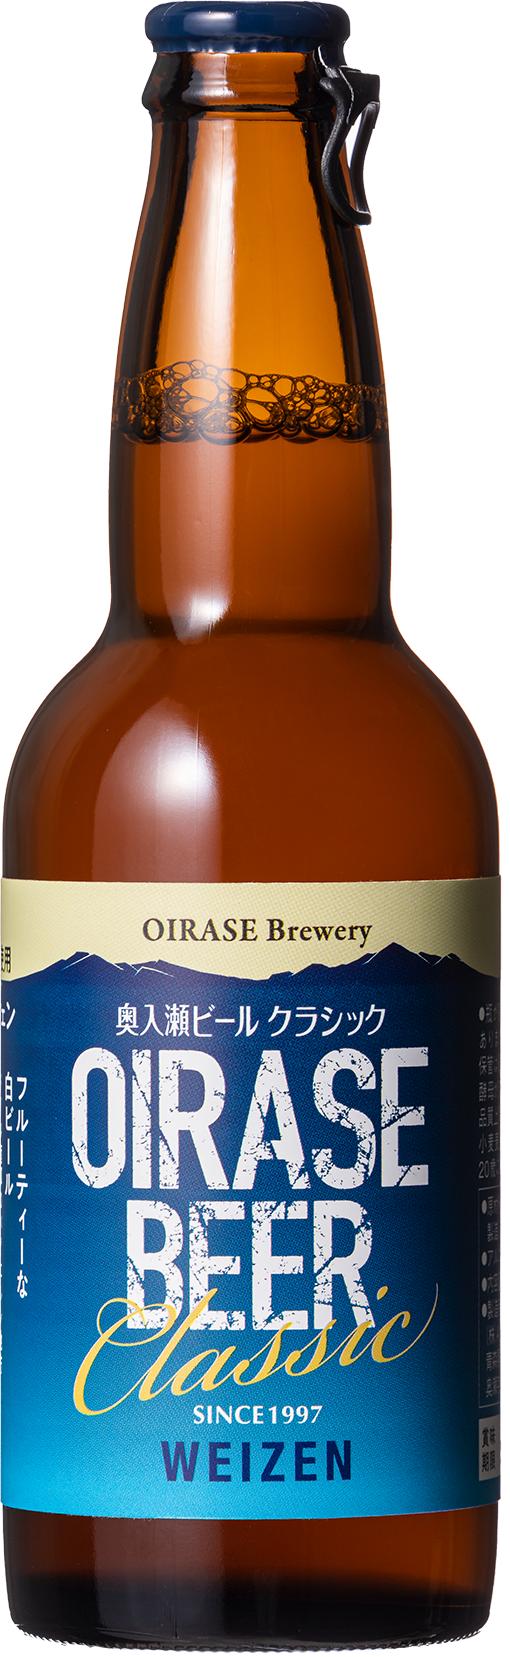 OIRASE BEER image4